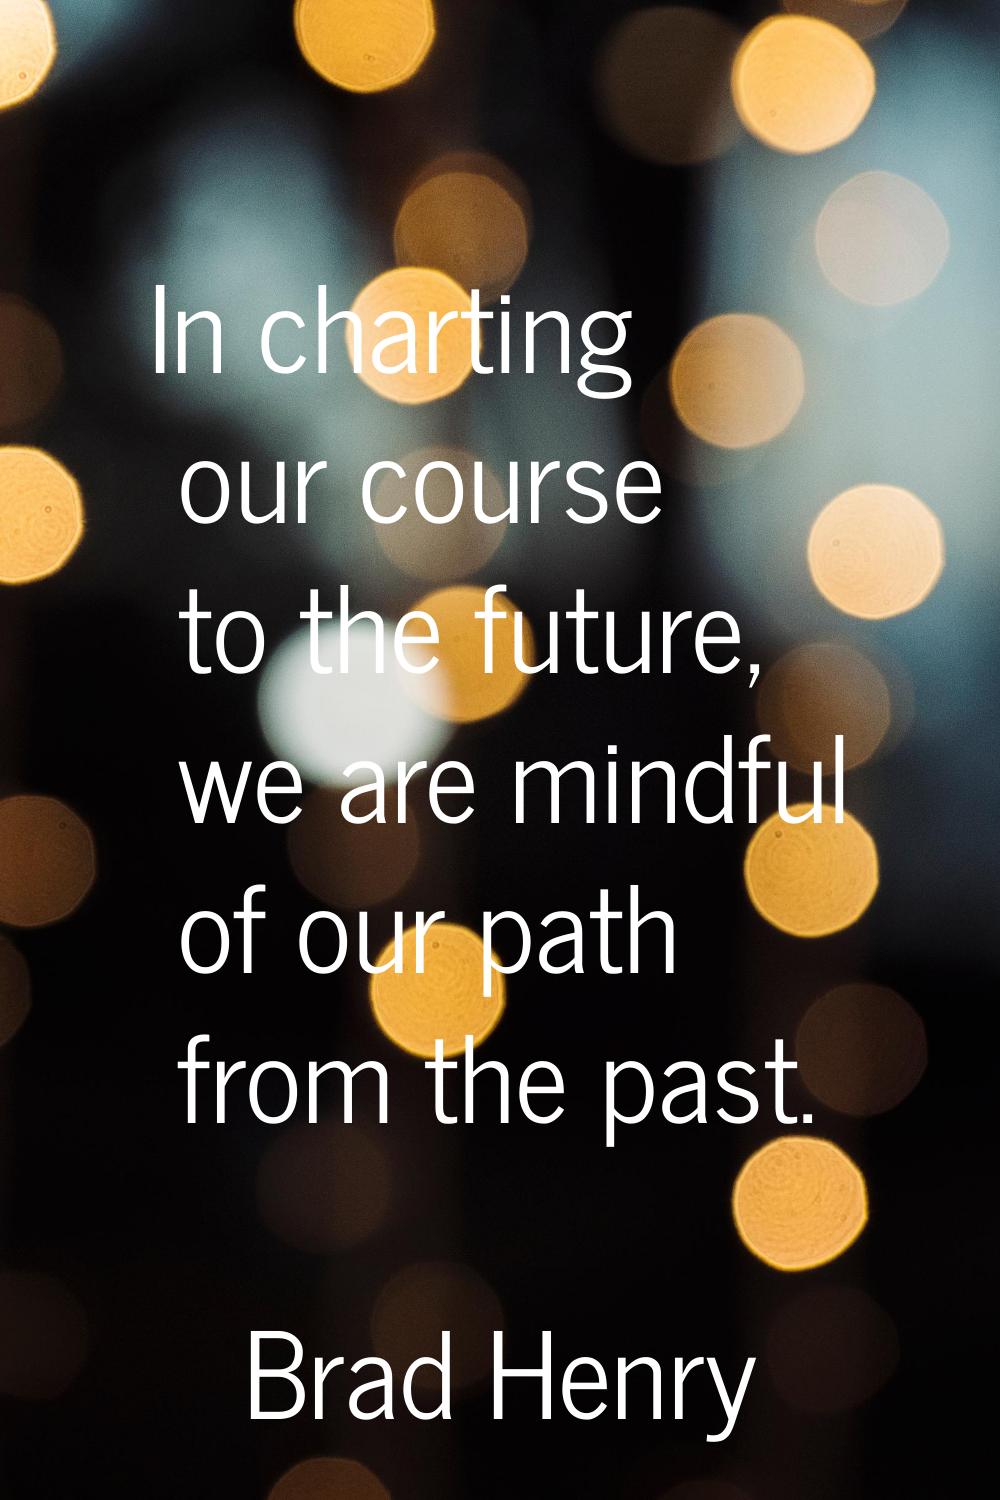 In charting our course to the future, we are mindful of our path from the past.